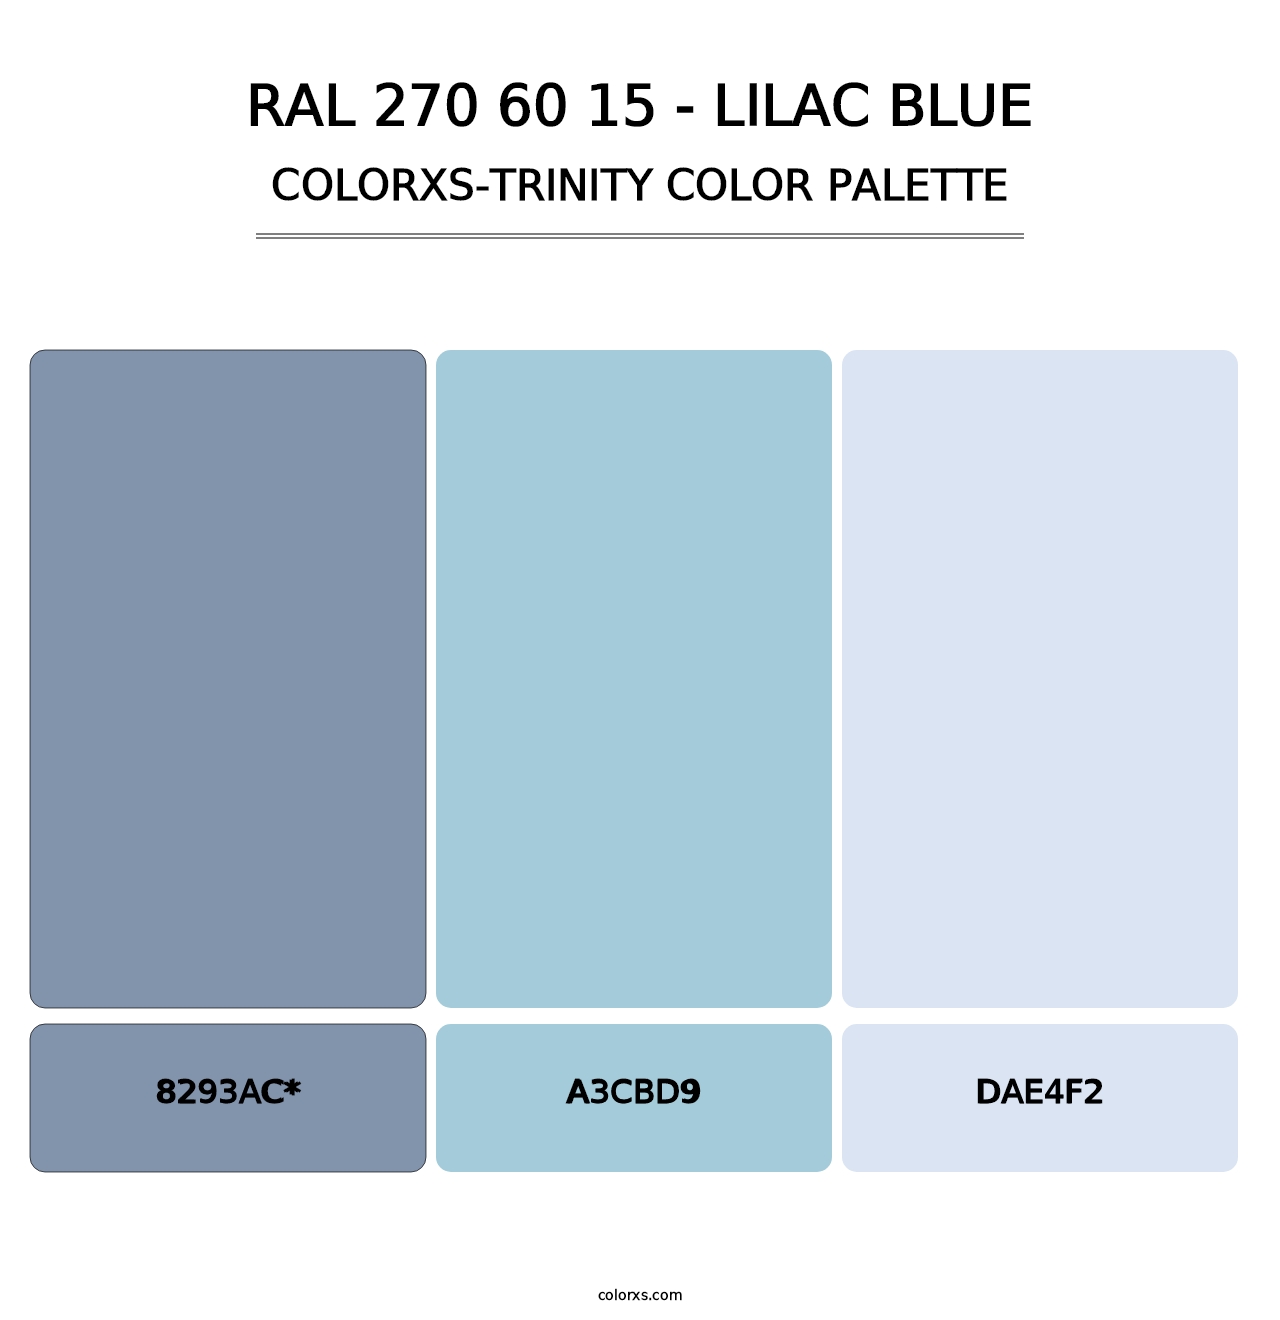 RAL 270 60 15 - Lilac Blue - Colorxs Trinity Palette